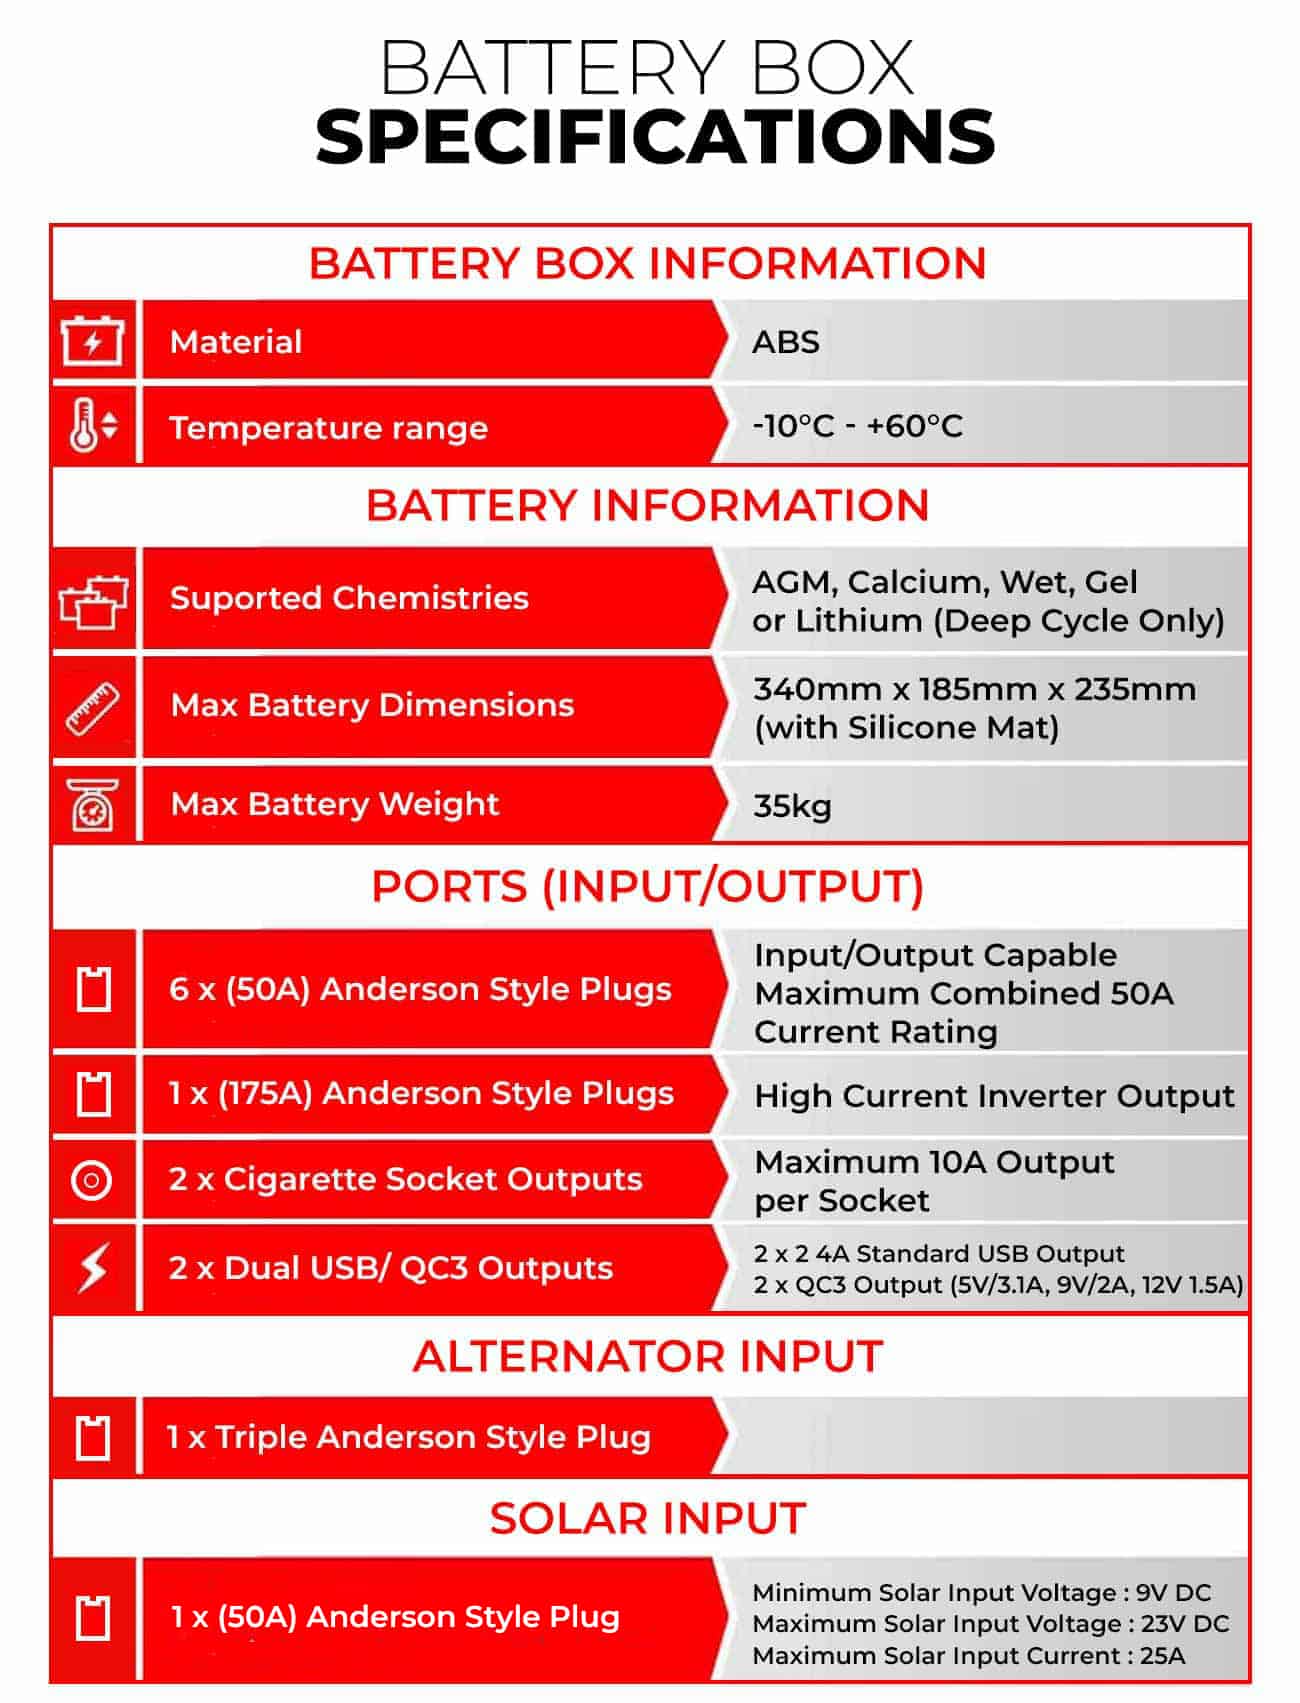 Battery box specifications